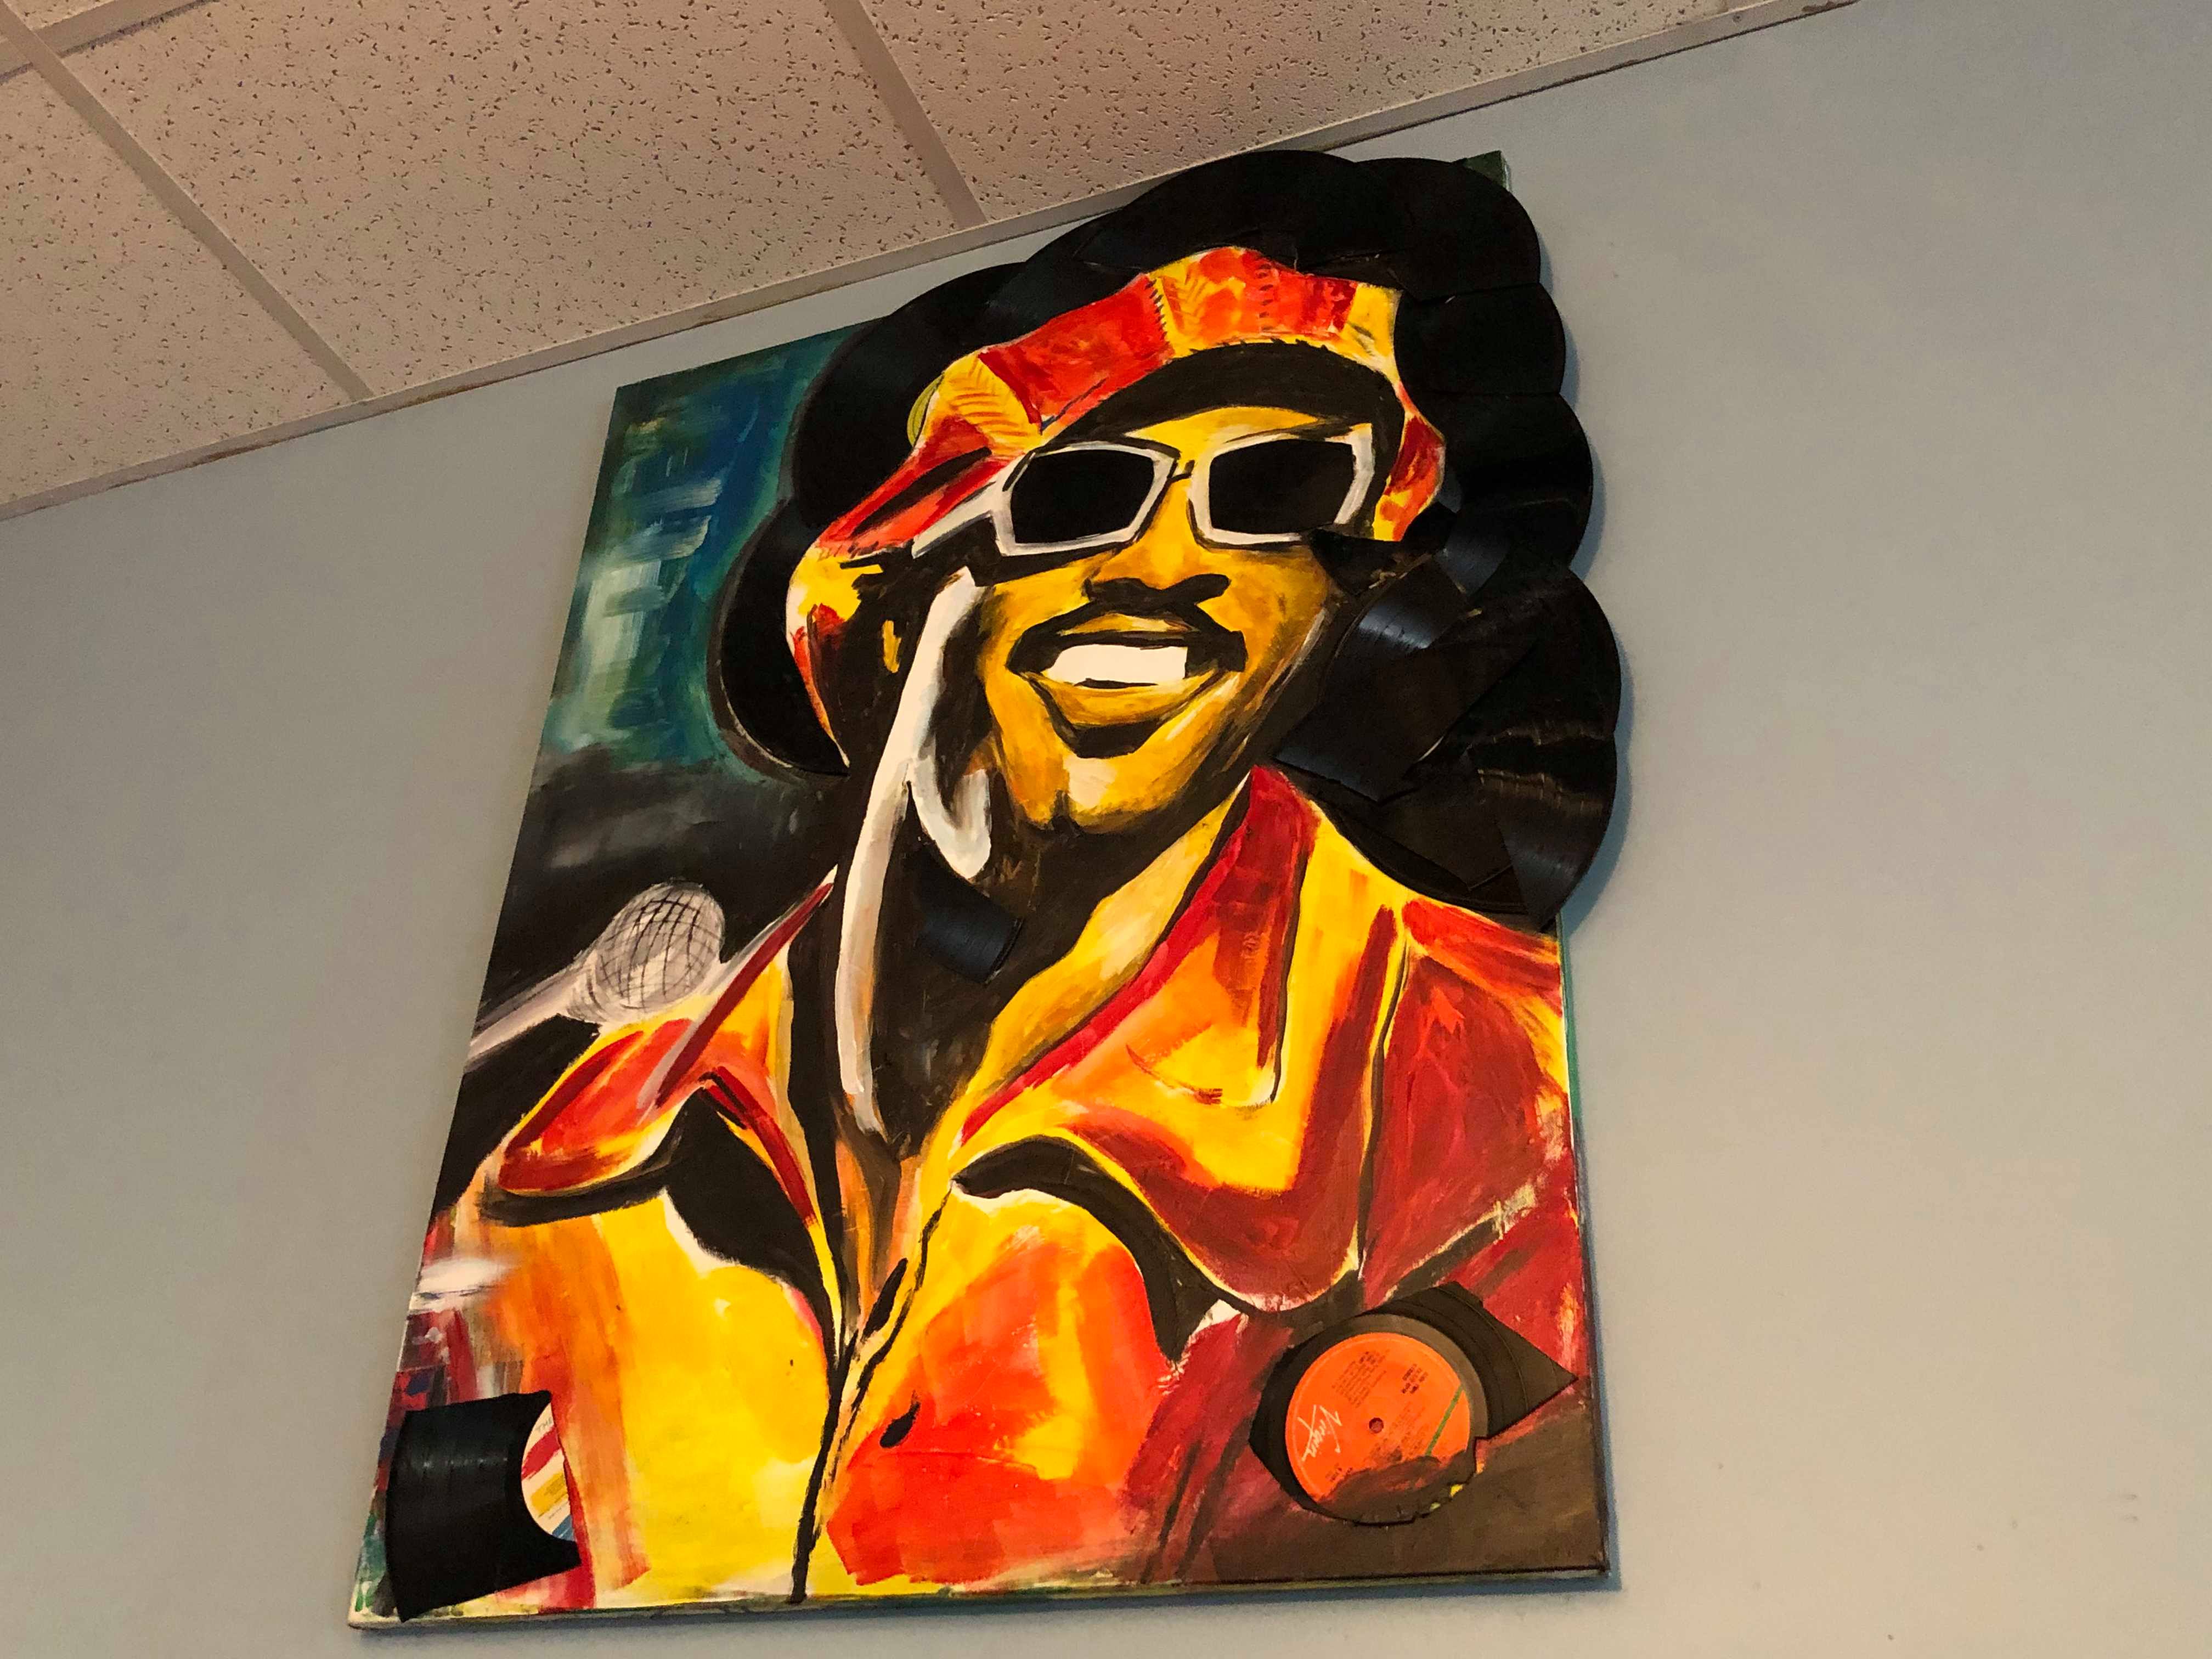 Painting by local artist Lenny Cain on display at Slice of Soul Pizza Lounge located at 1299 Madison Avenue in Madison Heights. (Scarlet Ponder)